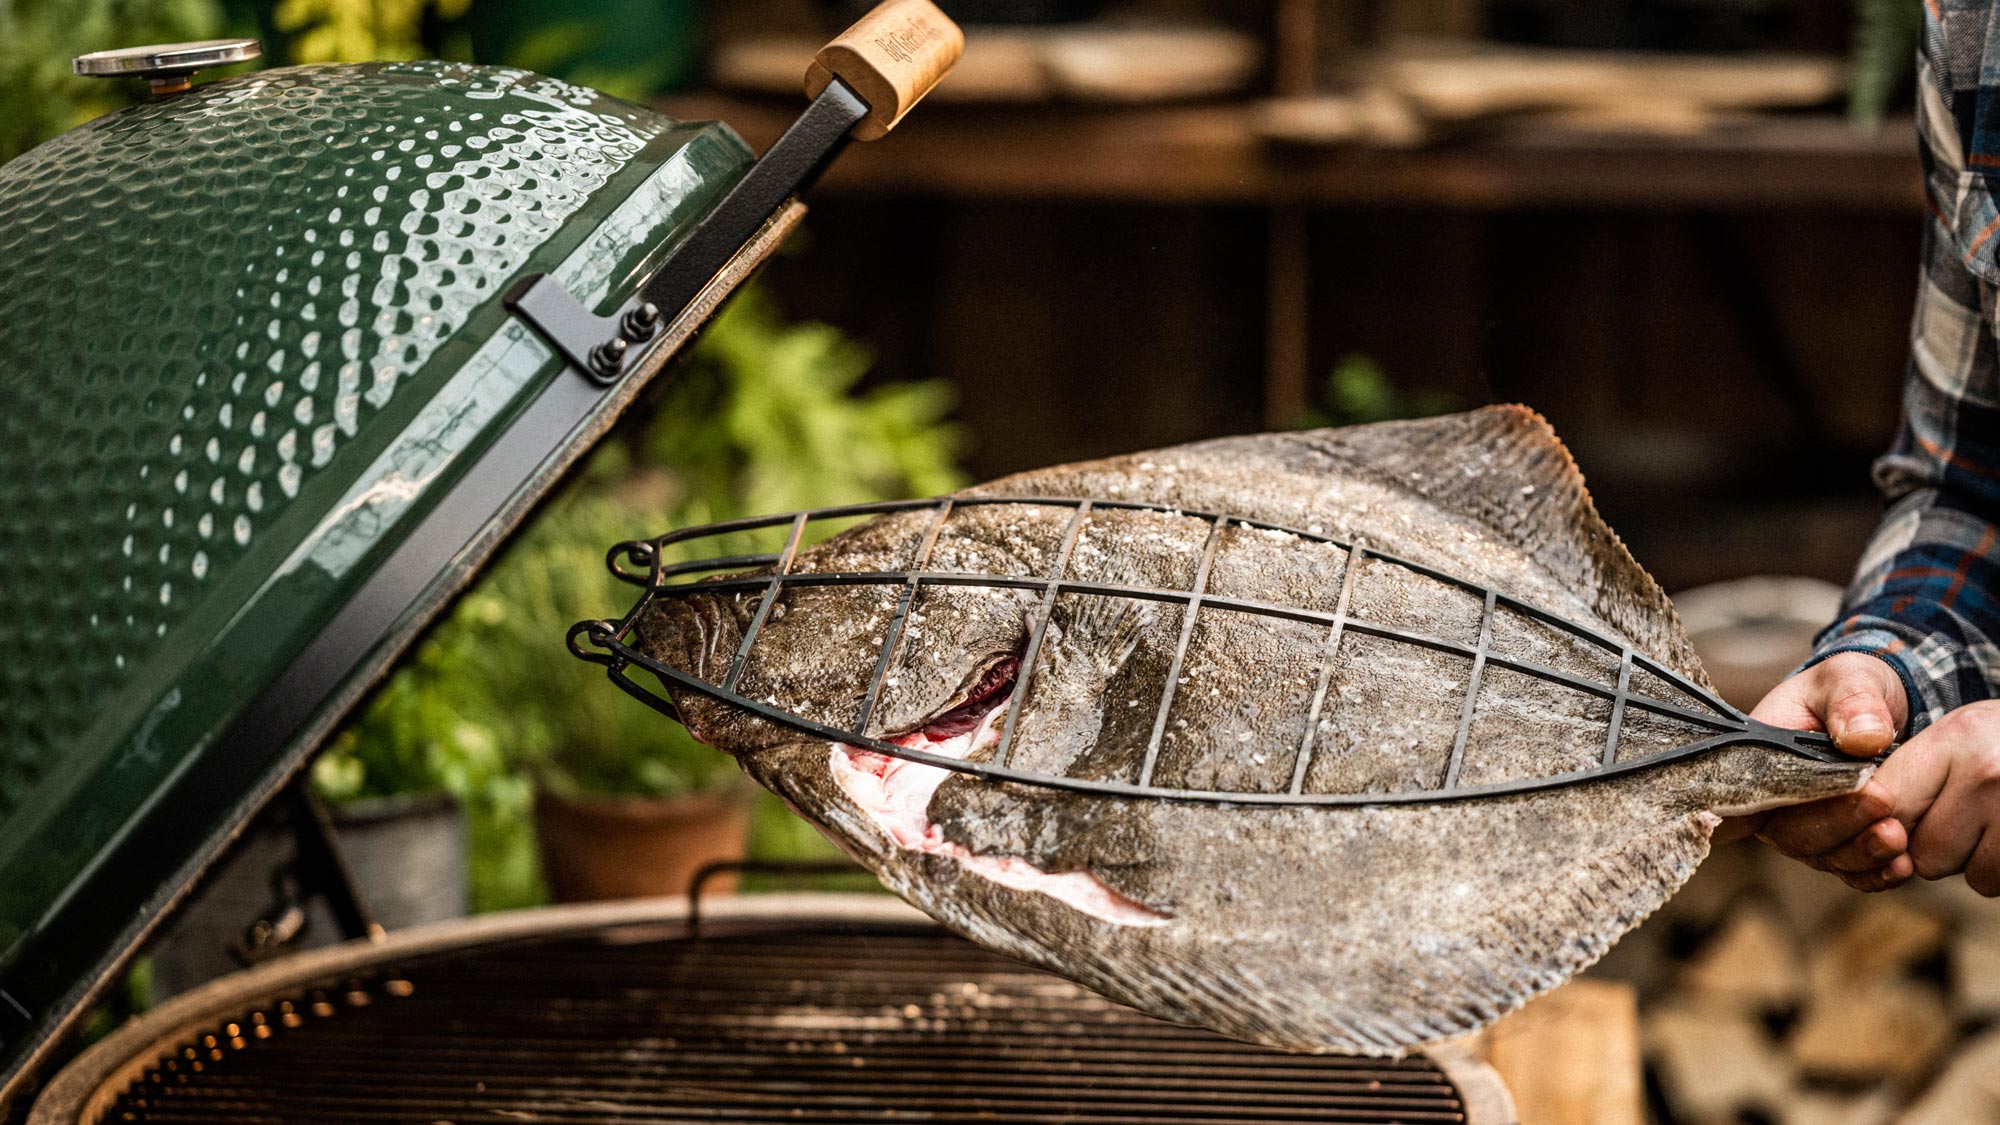 grill the fish in a fish cage